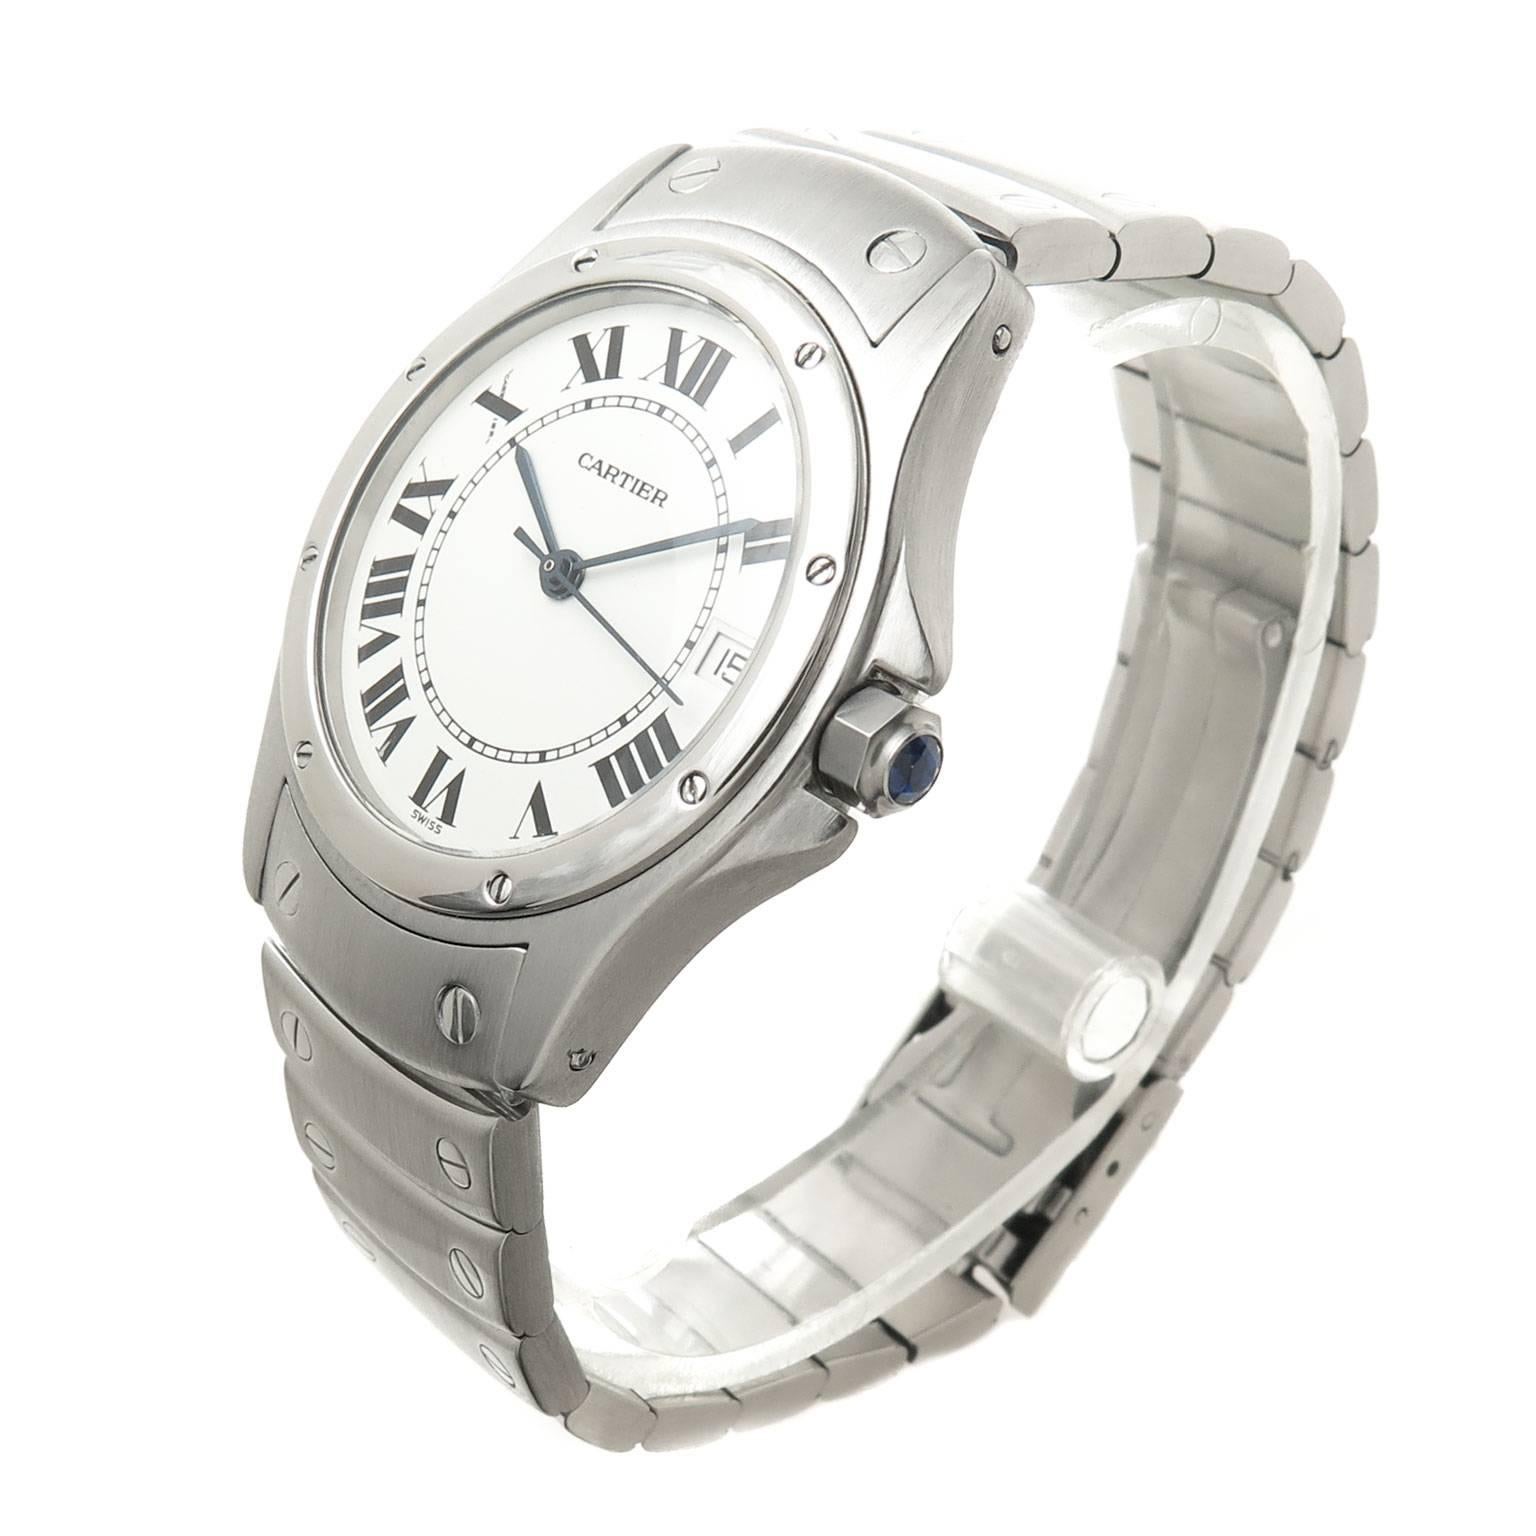 Circa 2000 Cartier Santos Wrist Watch, 33 MM water resistant case, Scratch resistant crystal, automatic, self winding movement with calendar window at the 3 position, sweep hand, White Dial with Black Roman Numerals, Sapphire Crown. 5/8 inch wide